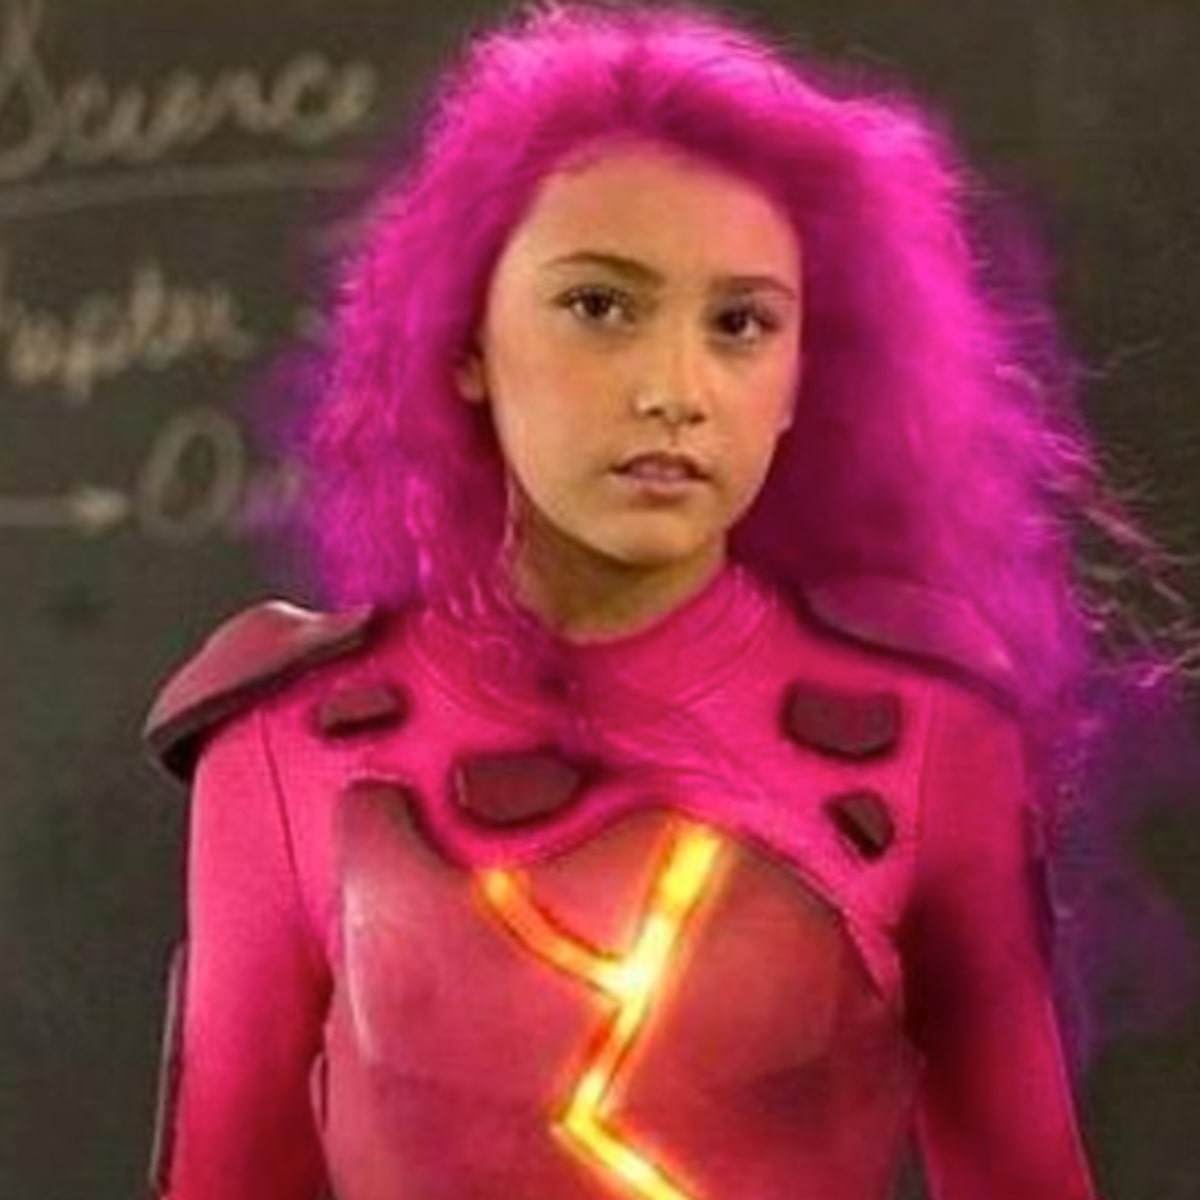 She was portrayed by Taylor Dooley Lavagirl is an imaginary superhero creat...